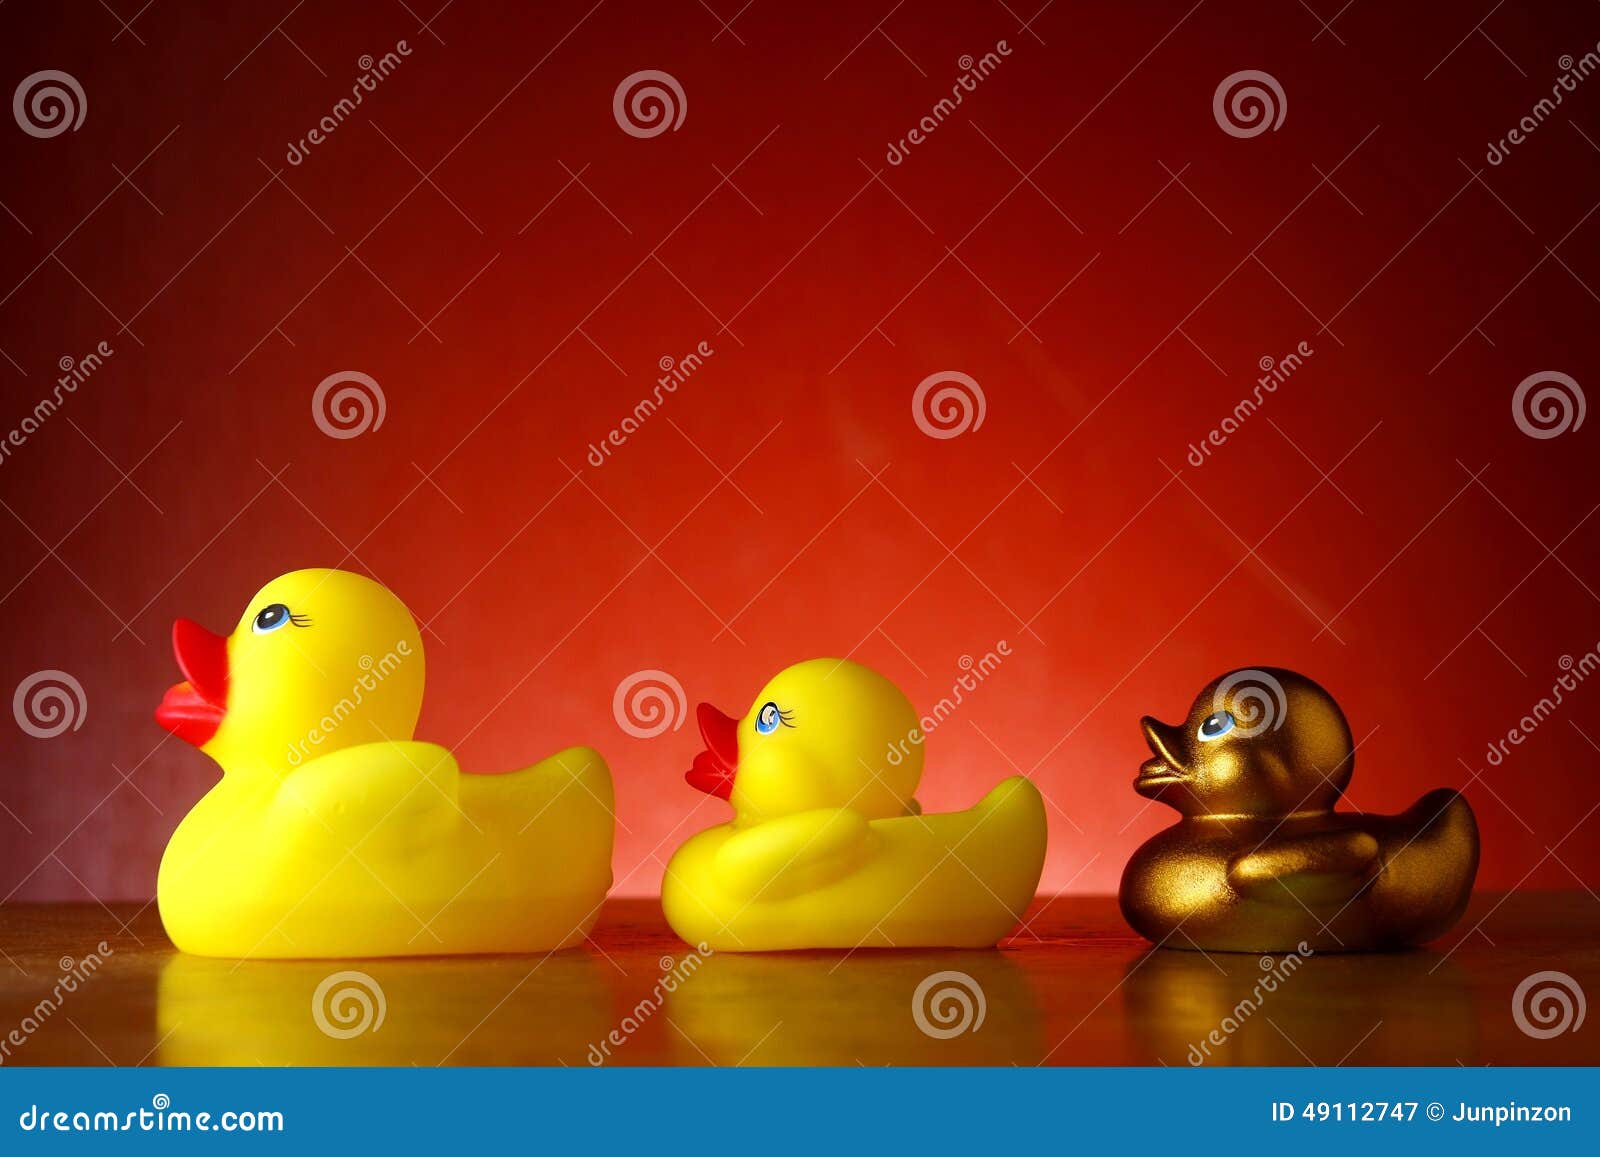 rubber duckies and golden rubber duckling